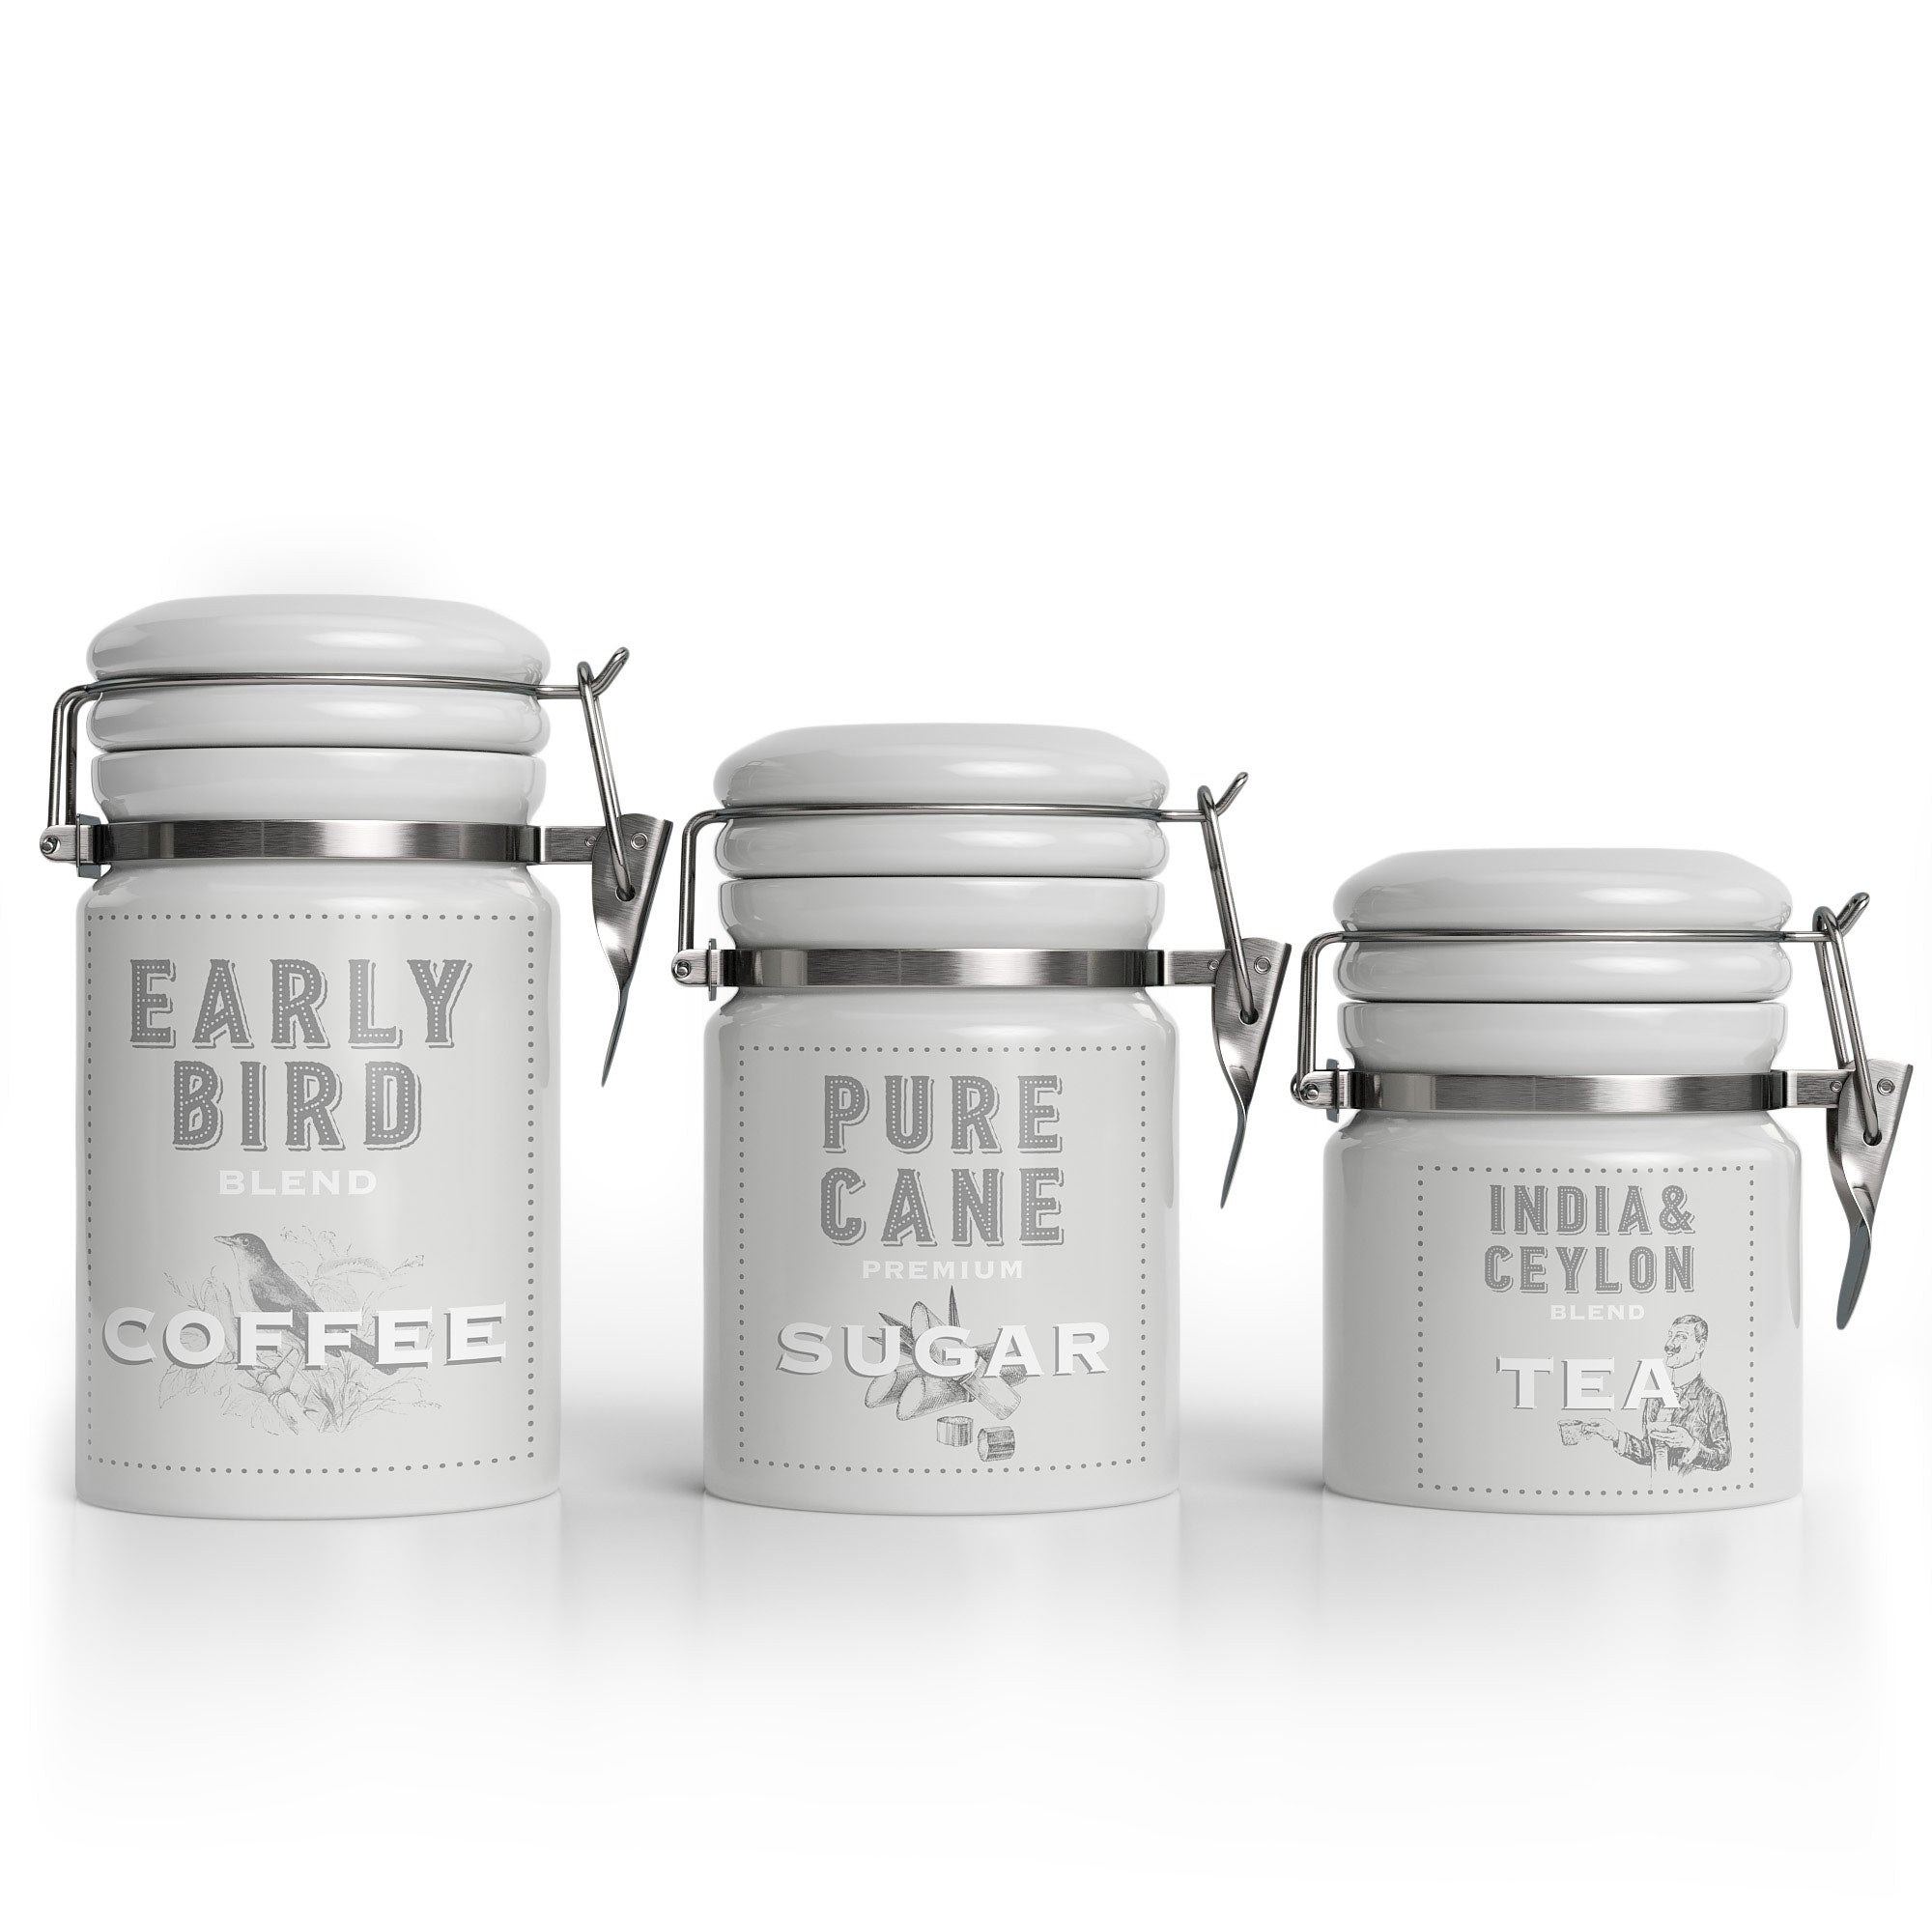 Barnyard Designs Canister Sets for Kitchen Counter, Ceramic Canister Set,  Decorative Kitchen Canisters, Coffee Tea Sugar Container Set, Rustic  Farmhouse Canisters Ceramic Jar, White, Set of 3